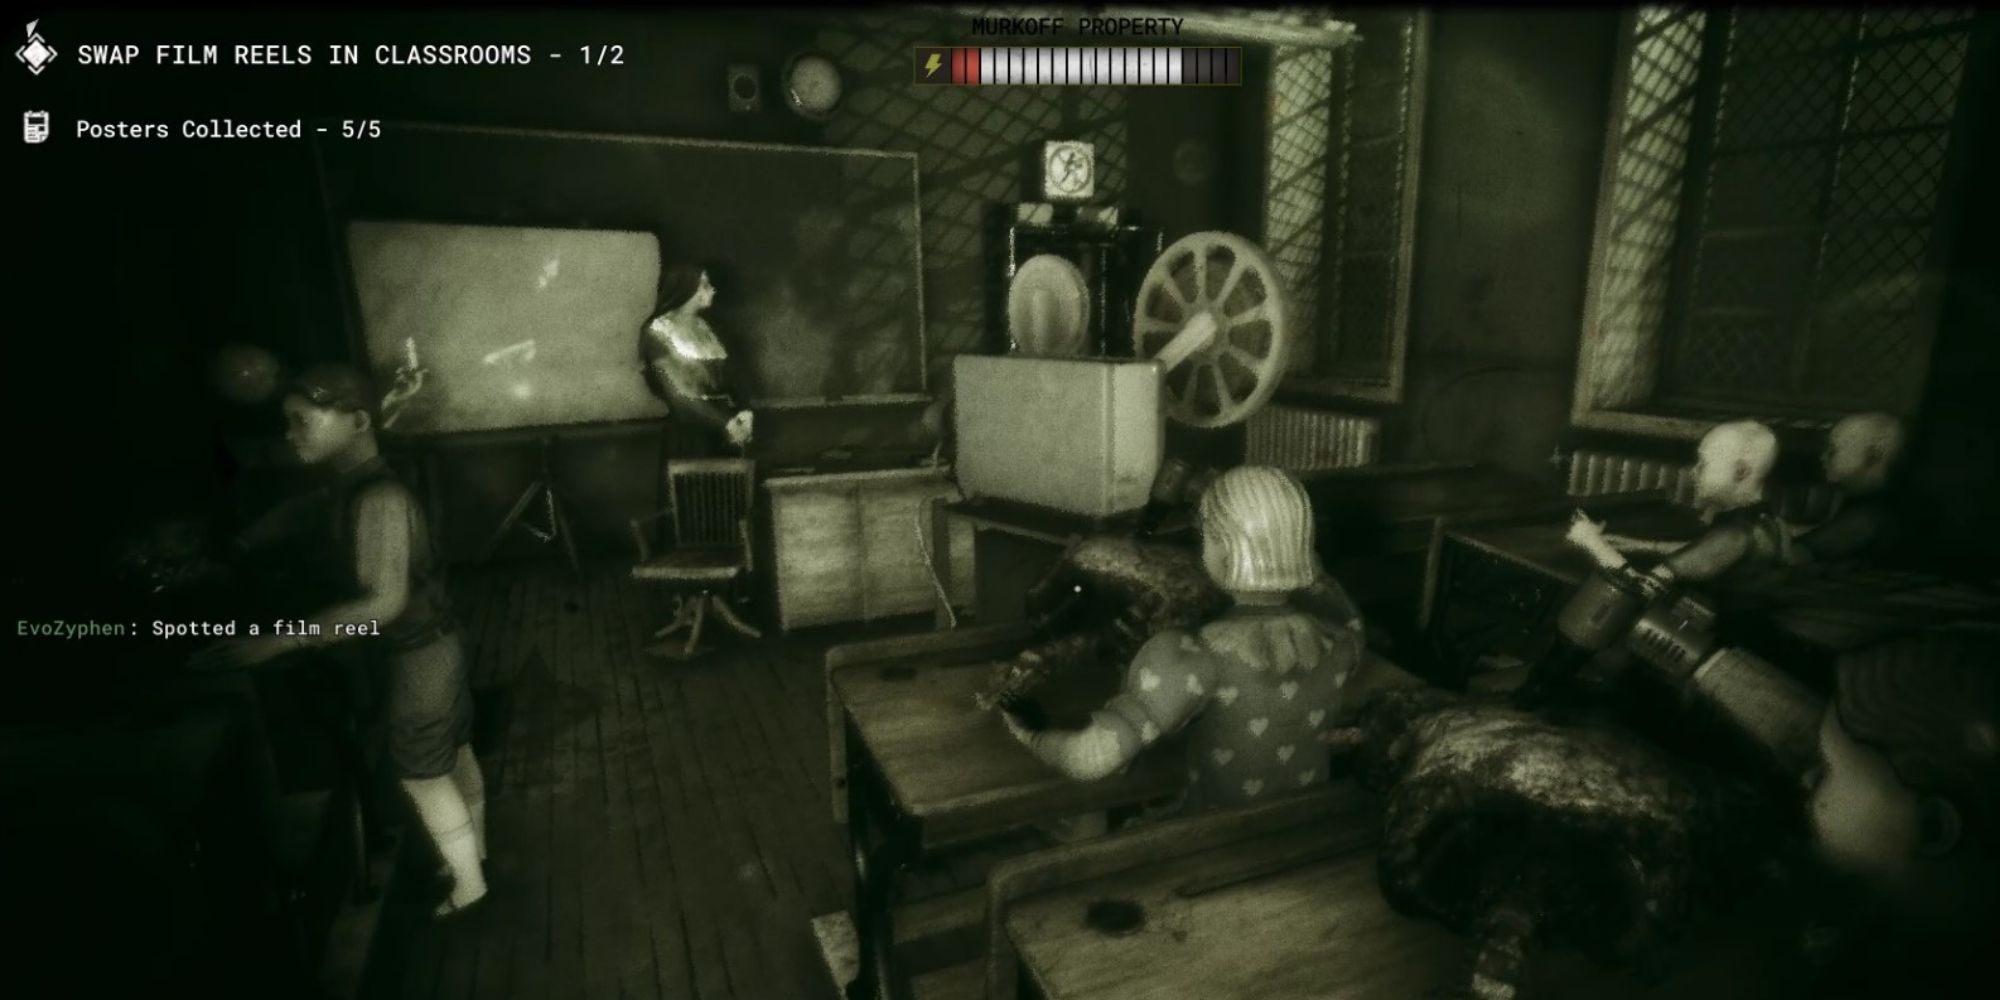 outlast trials projector in orphanage class room